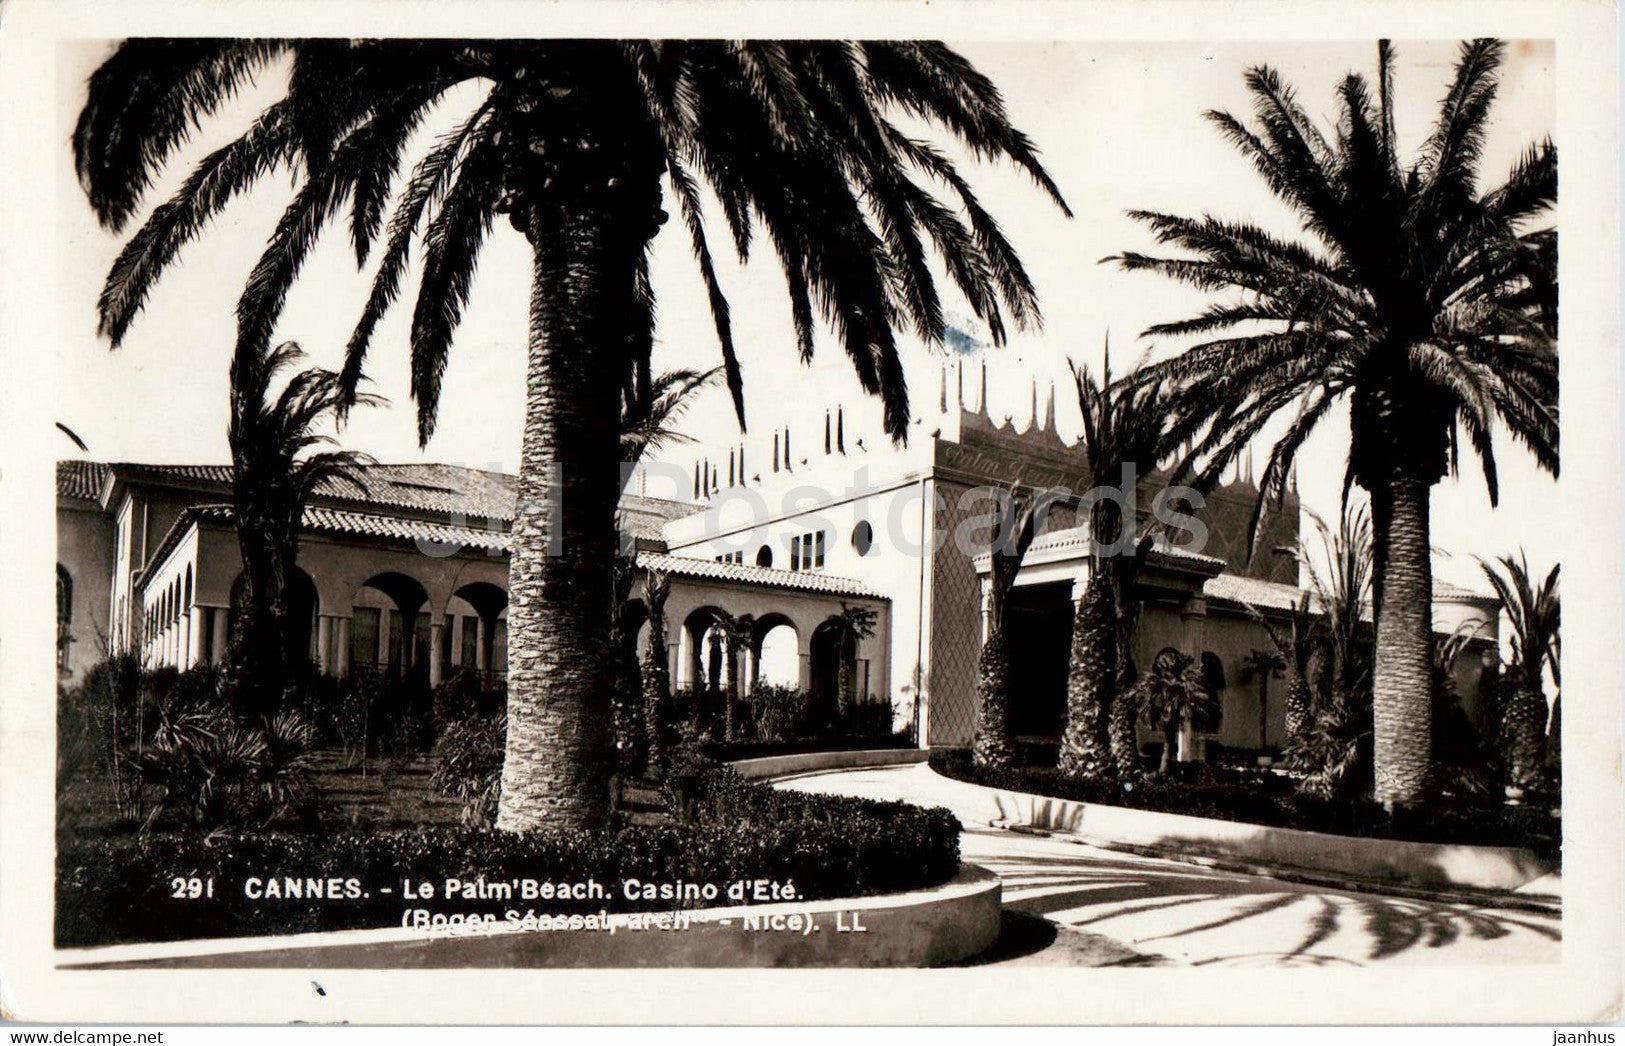 Cannes - Le Palm Beach - Casino d'Ete - 291 - old postcard - France - used - JH Postcards